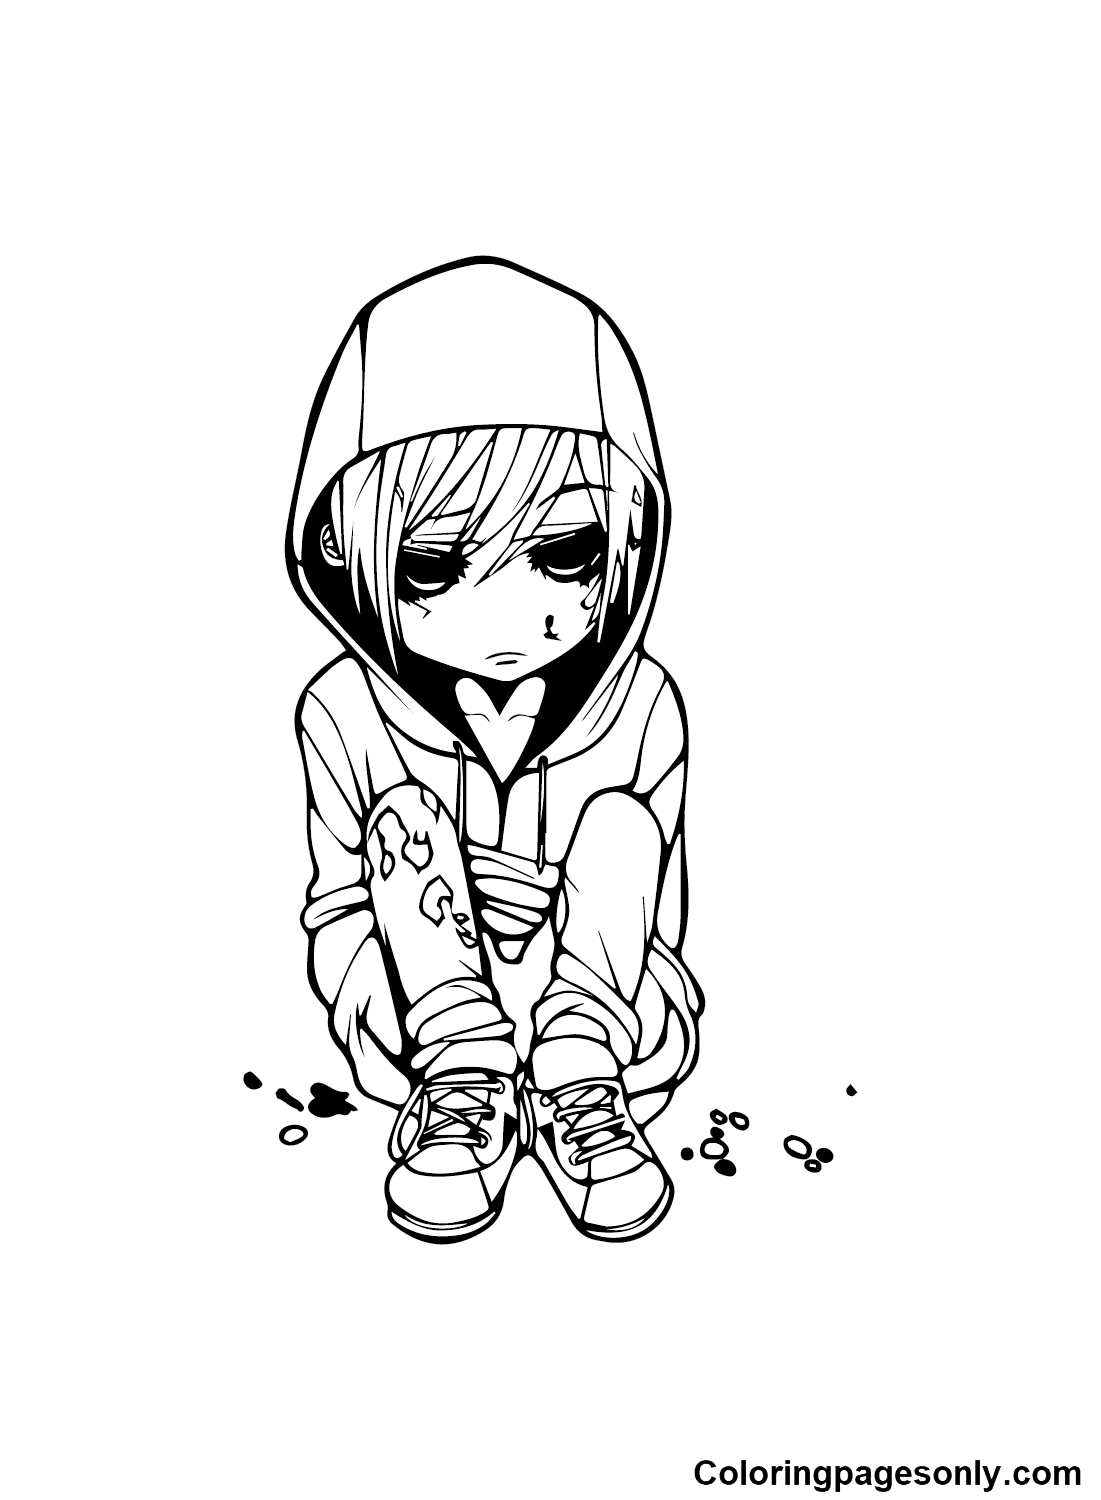 Emo to Download Coloring Page